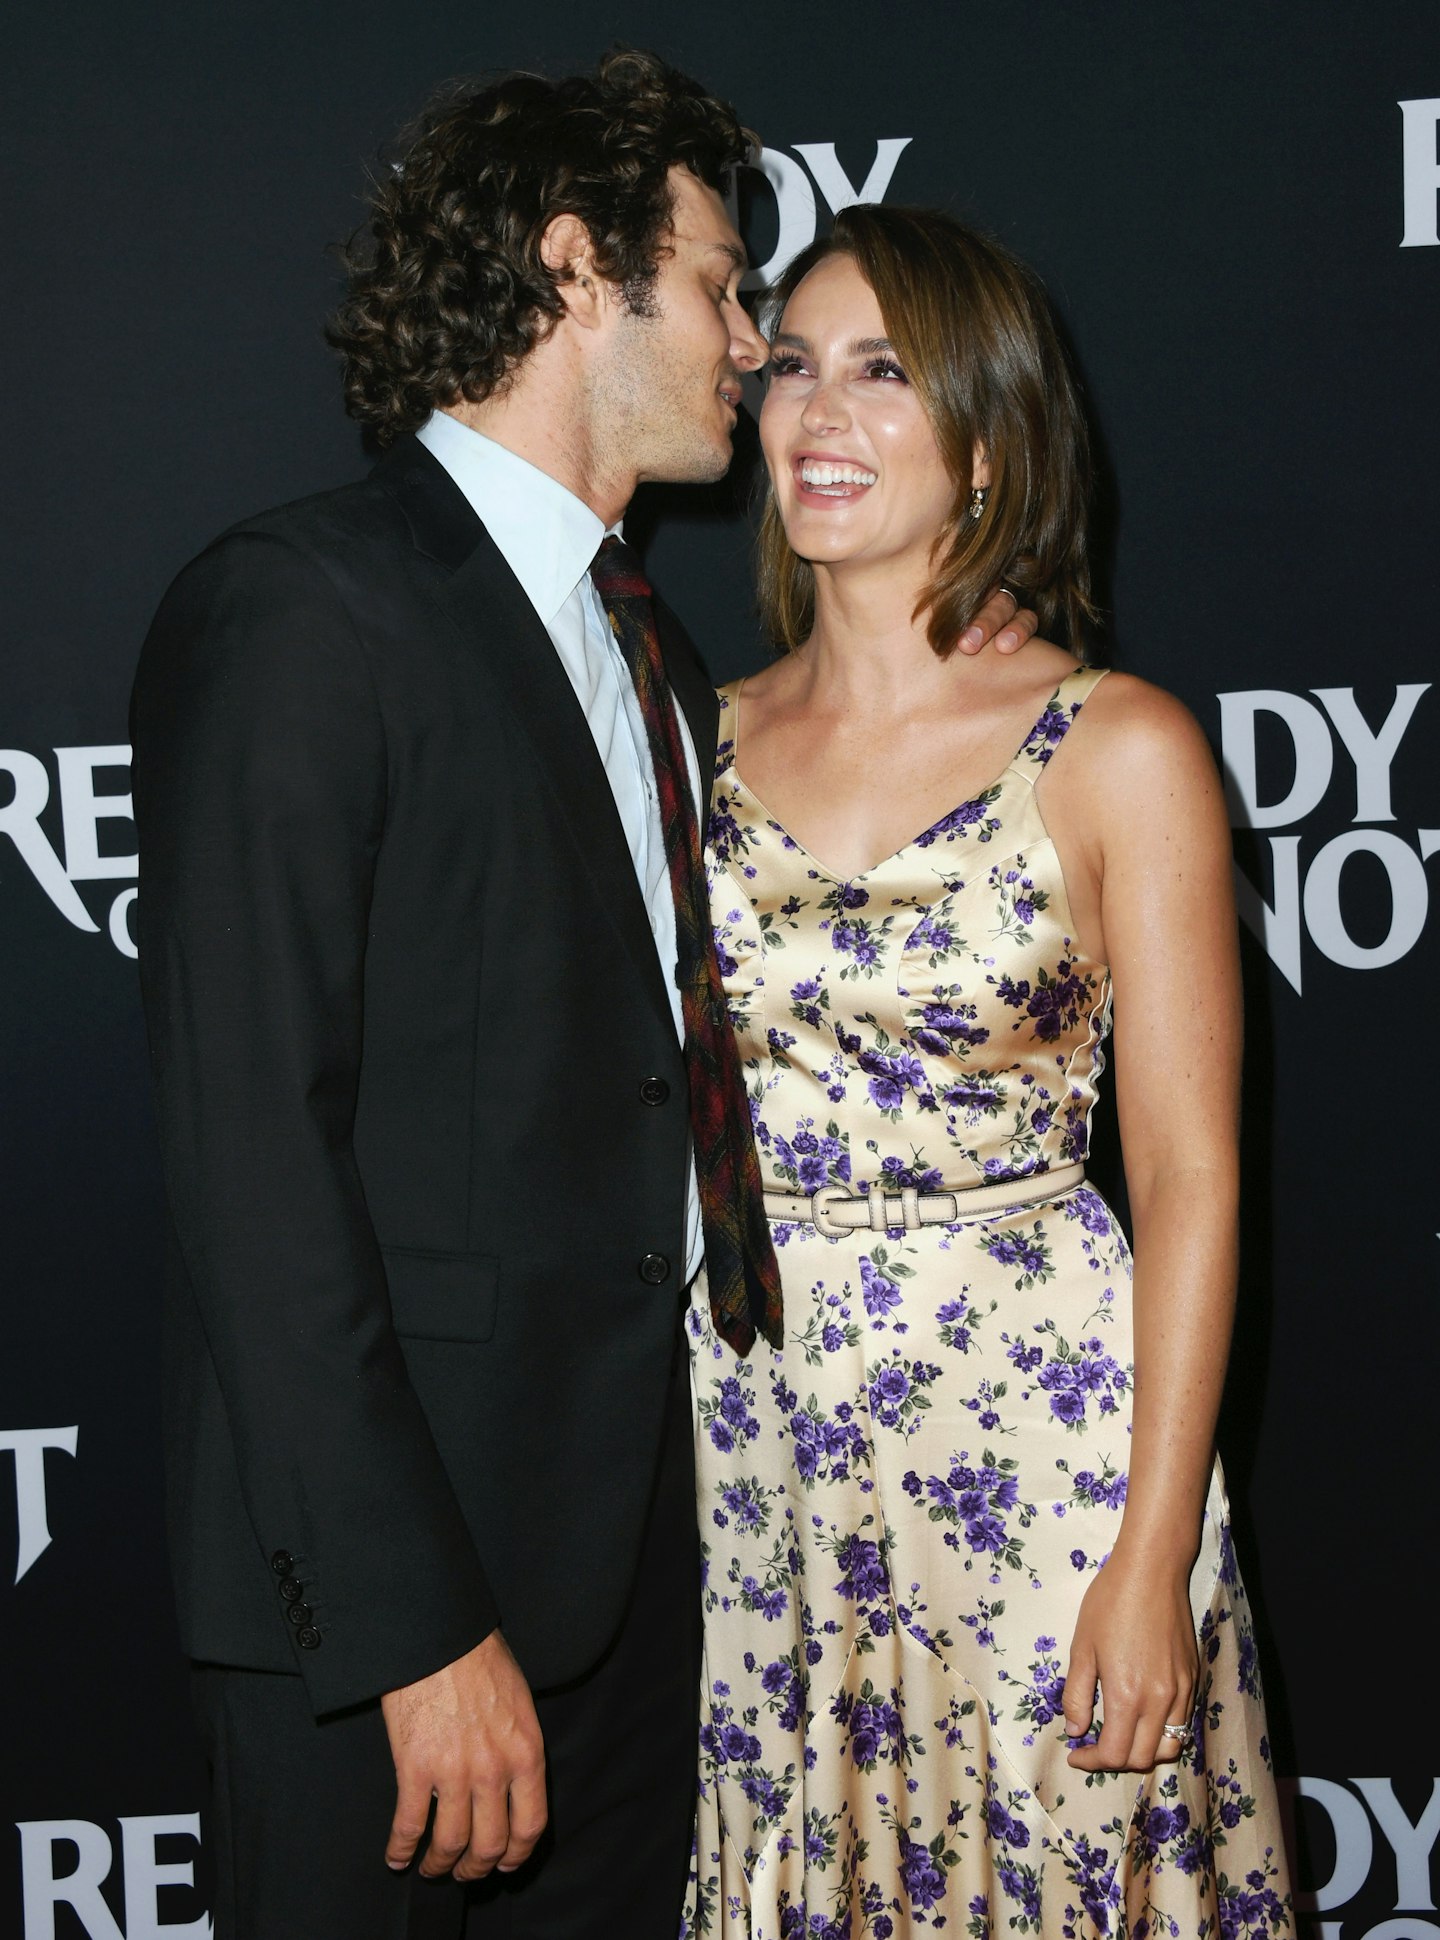 Adam Brody and Leighton Meester at the Ready Or Not Premiere